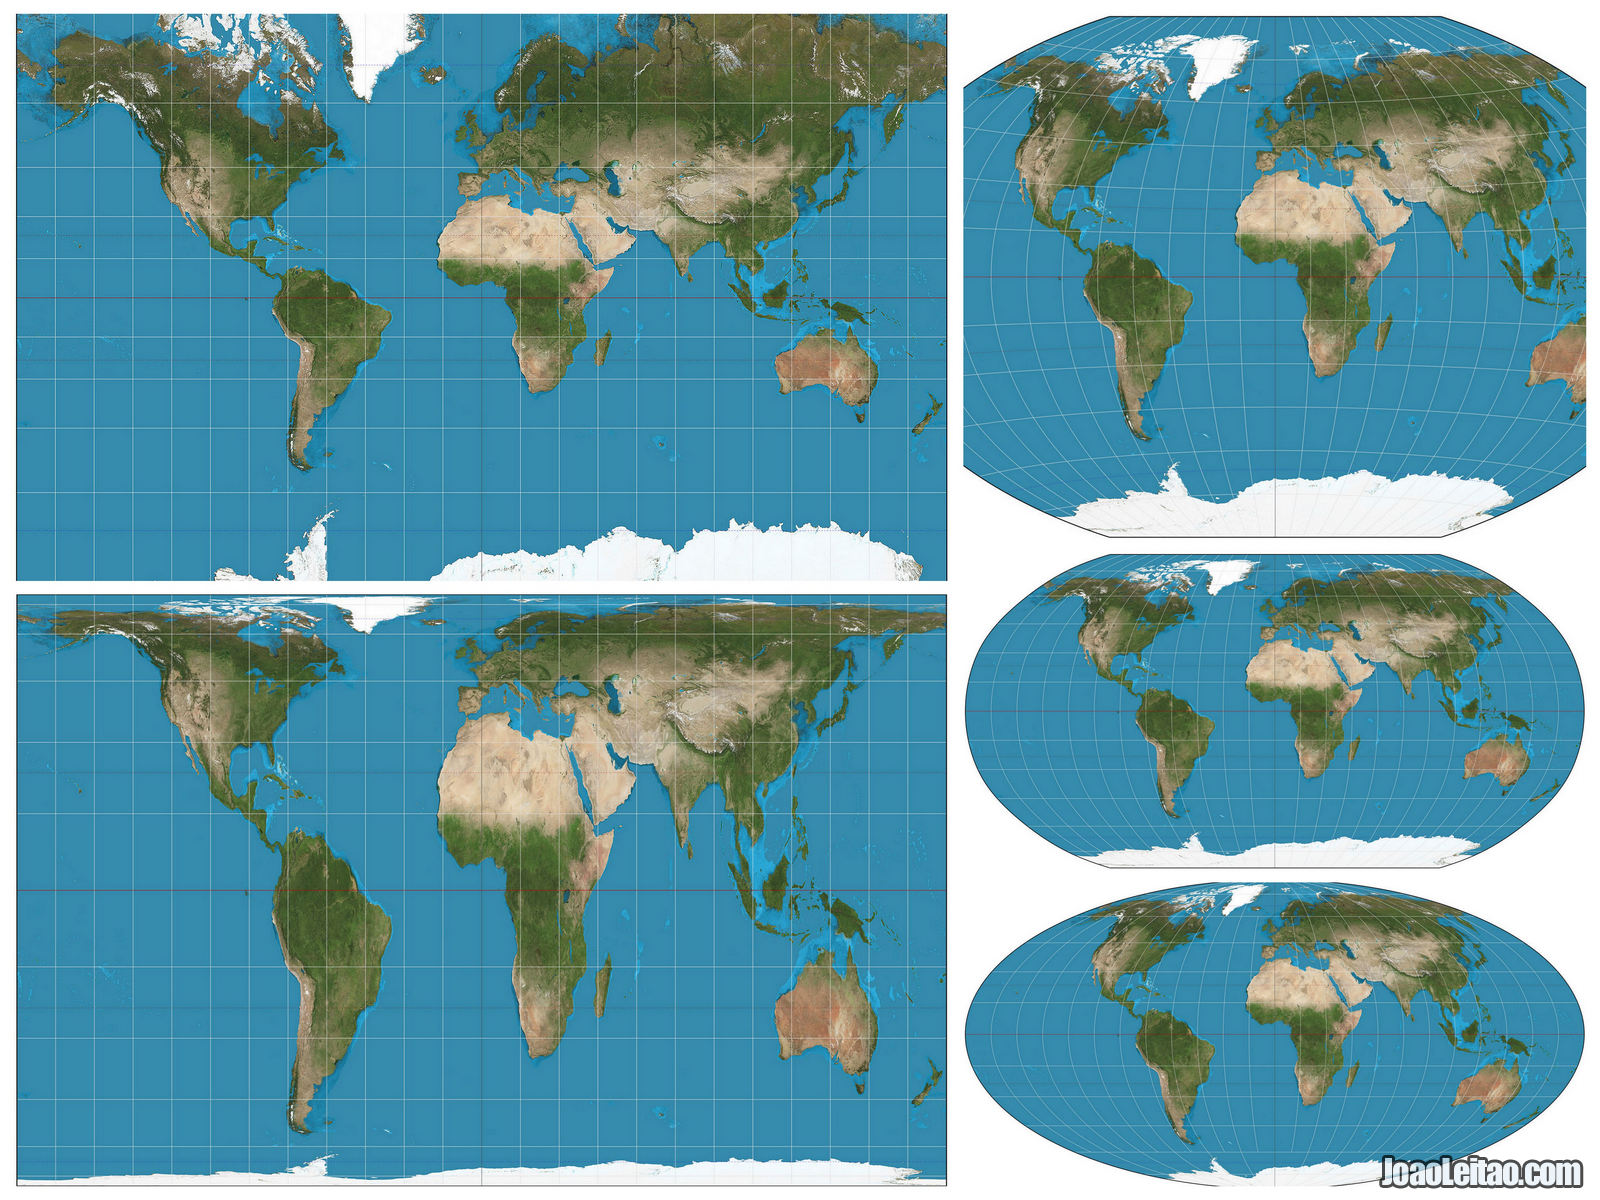 Several projections of a world map